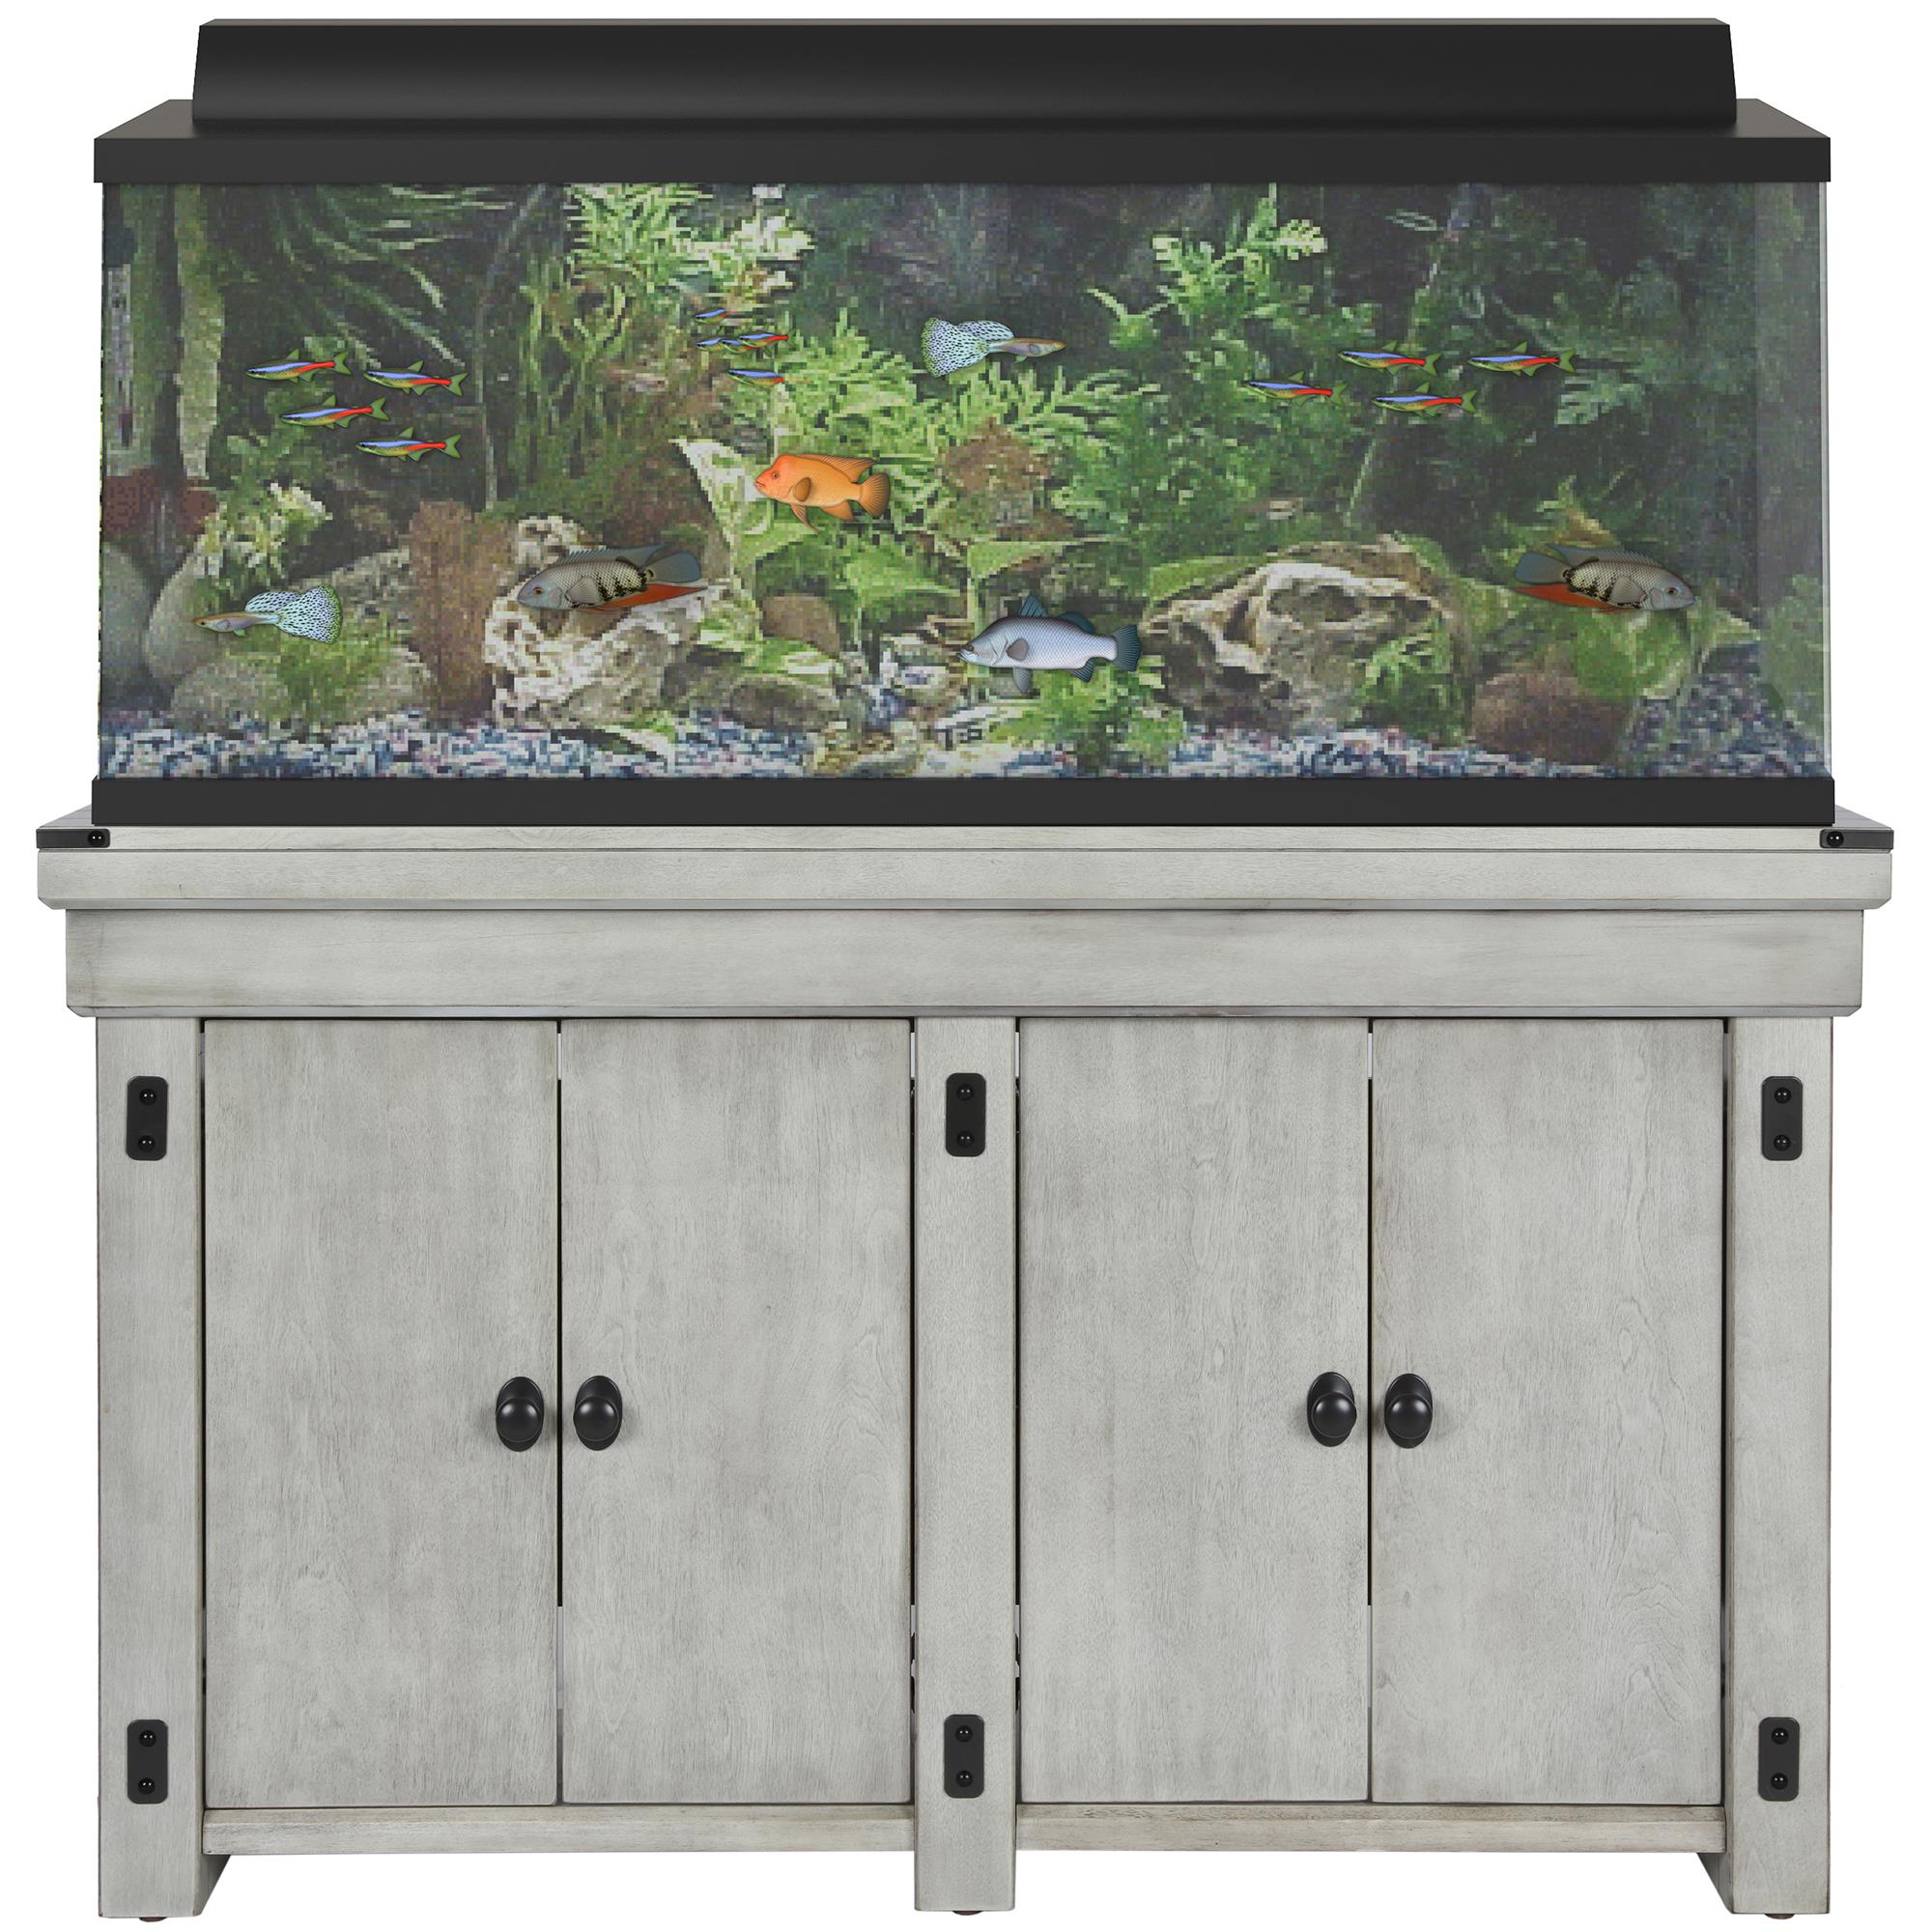 Flipper by Ollie & Hutch Wildwood 55 Gallon Aquarium Stand, Rustic White - image 4 of 14